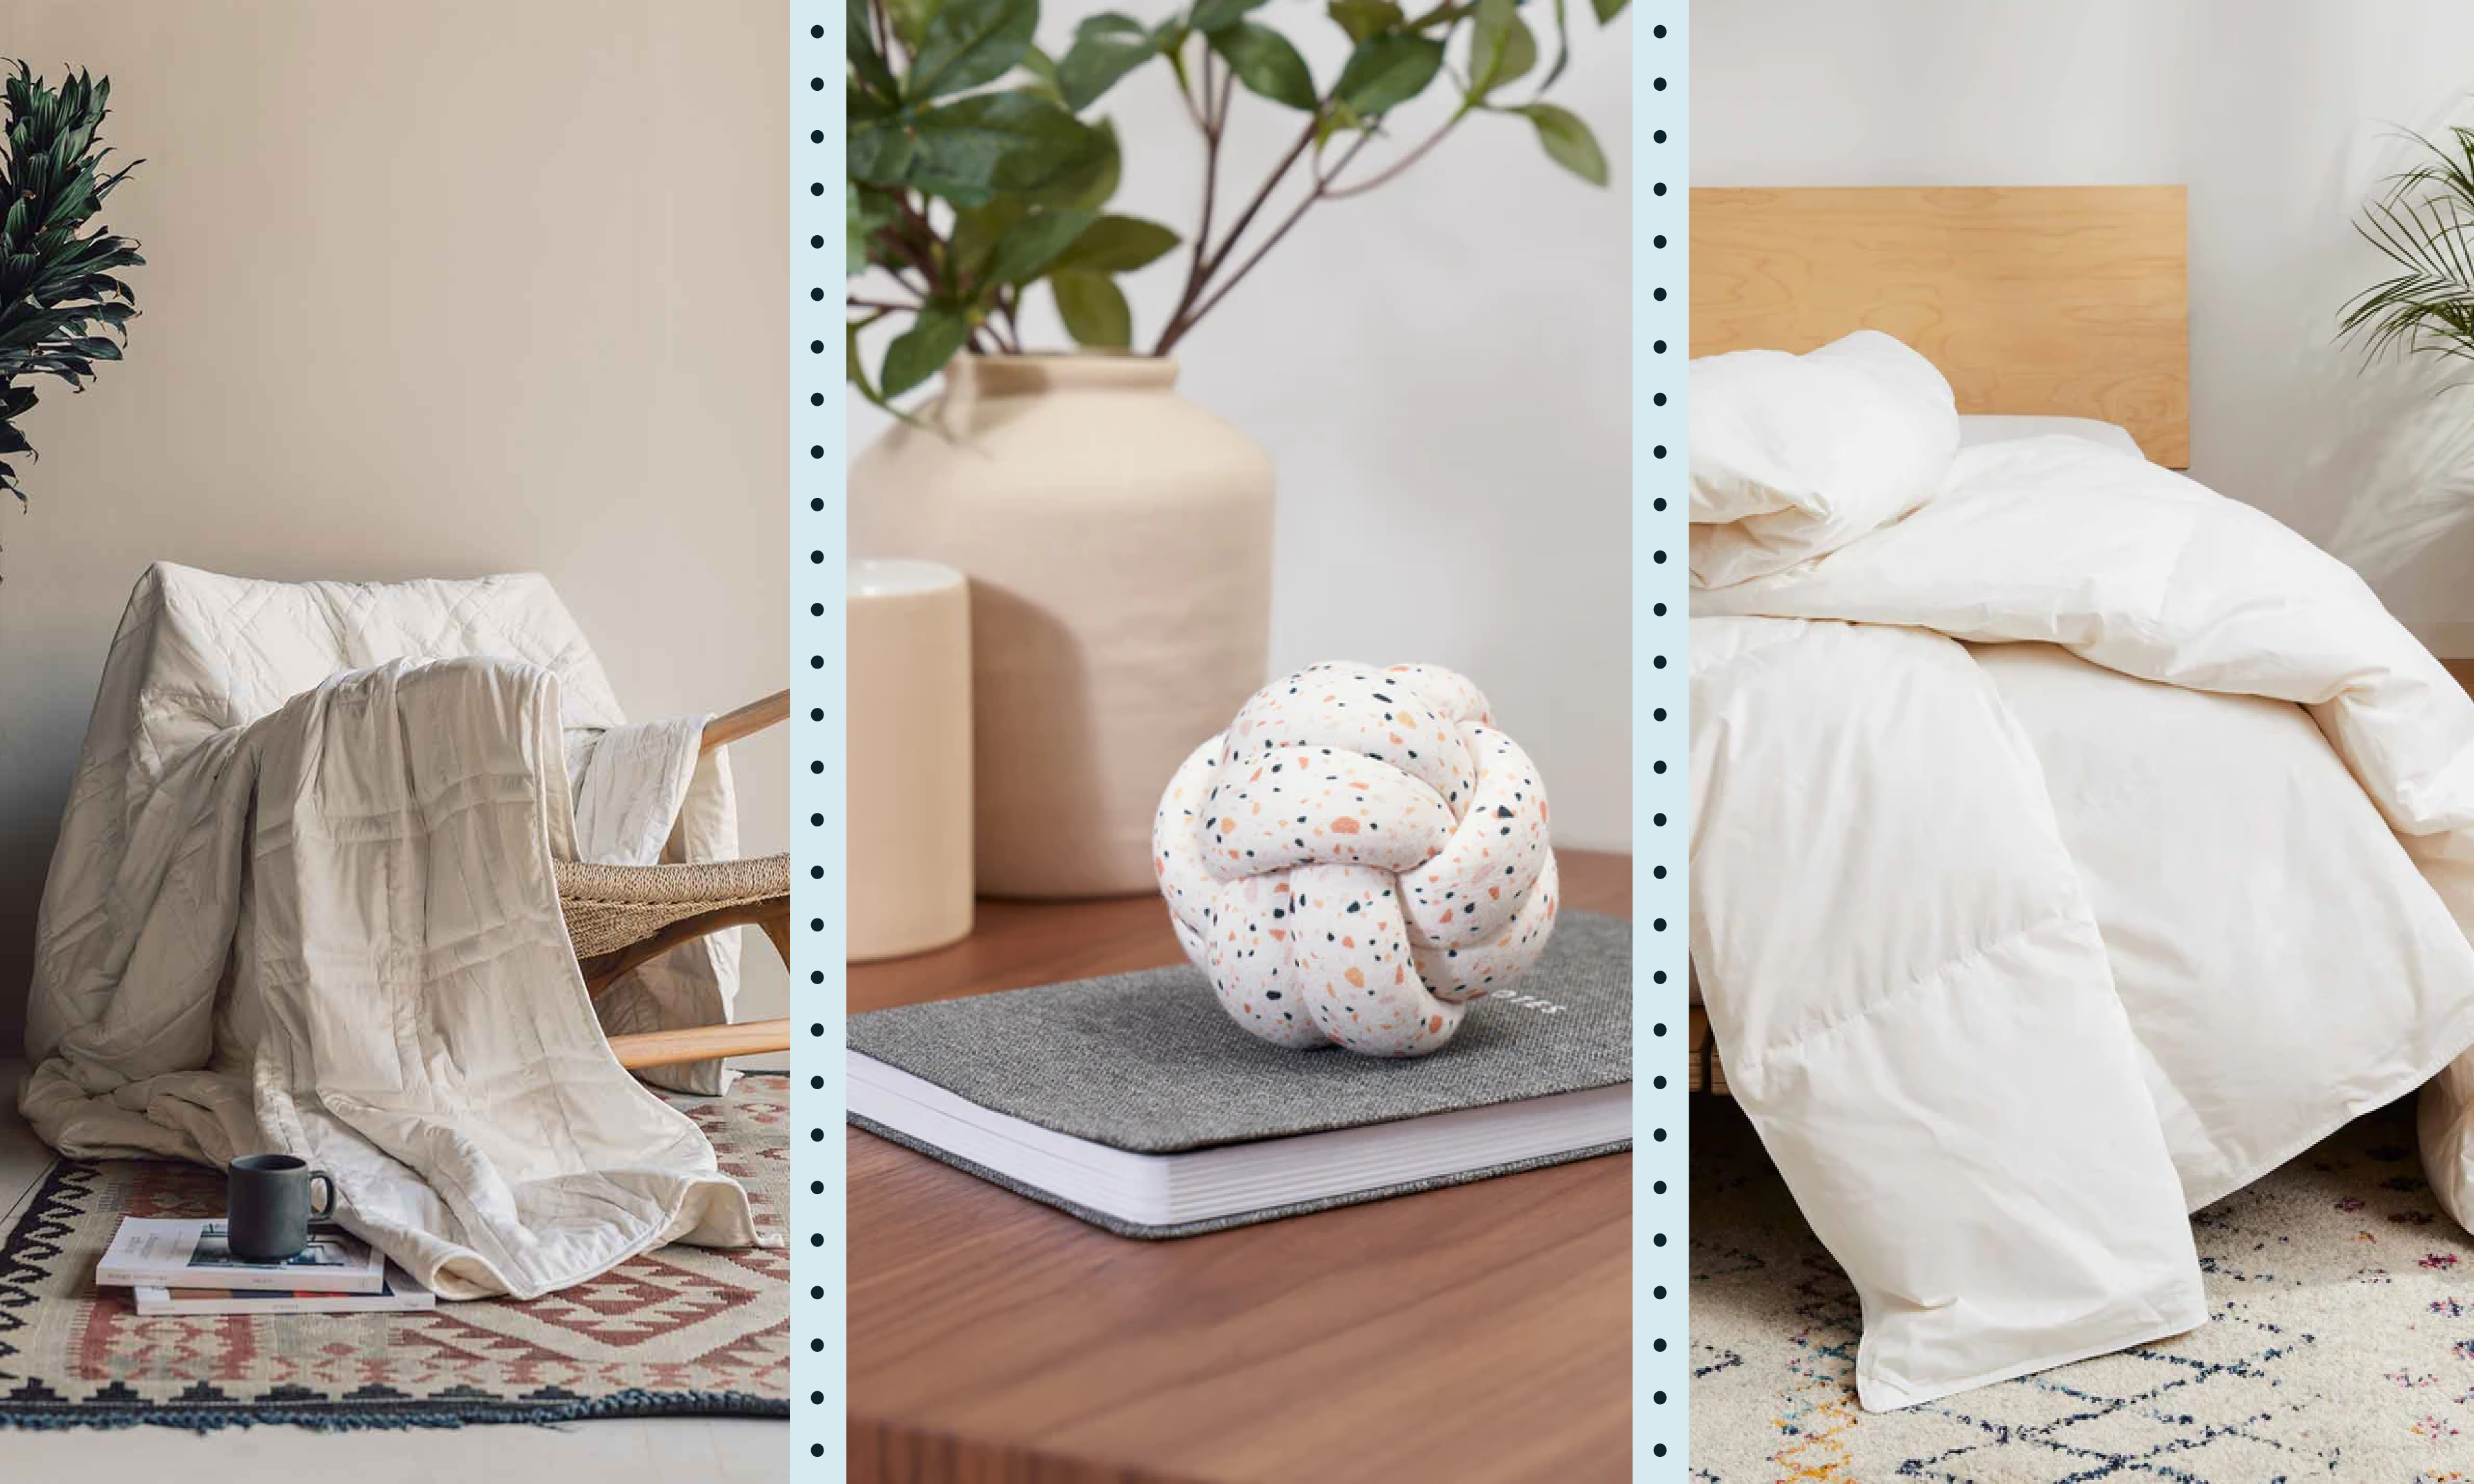 problem-solving products for your bedroom